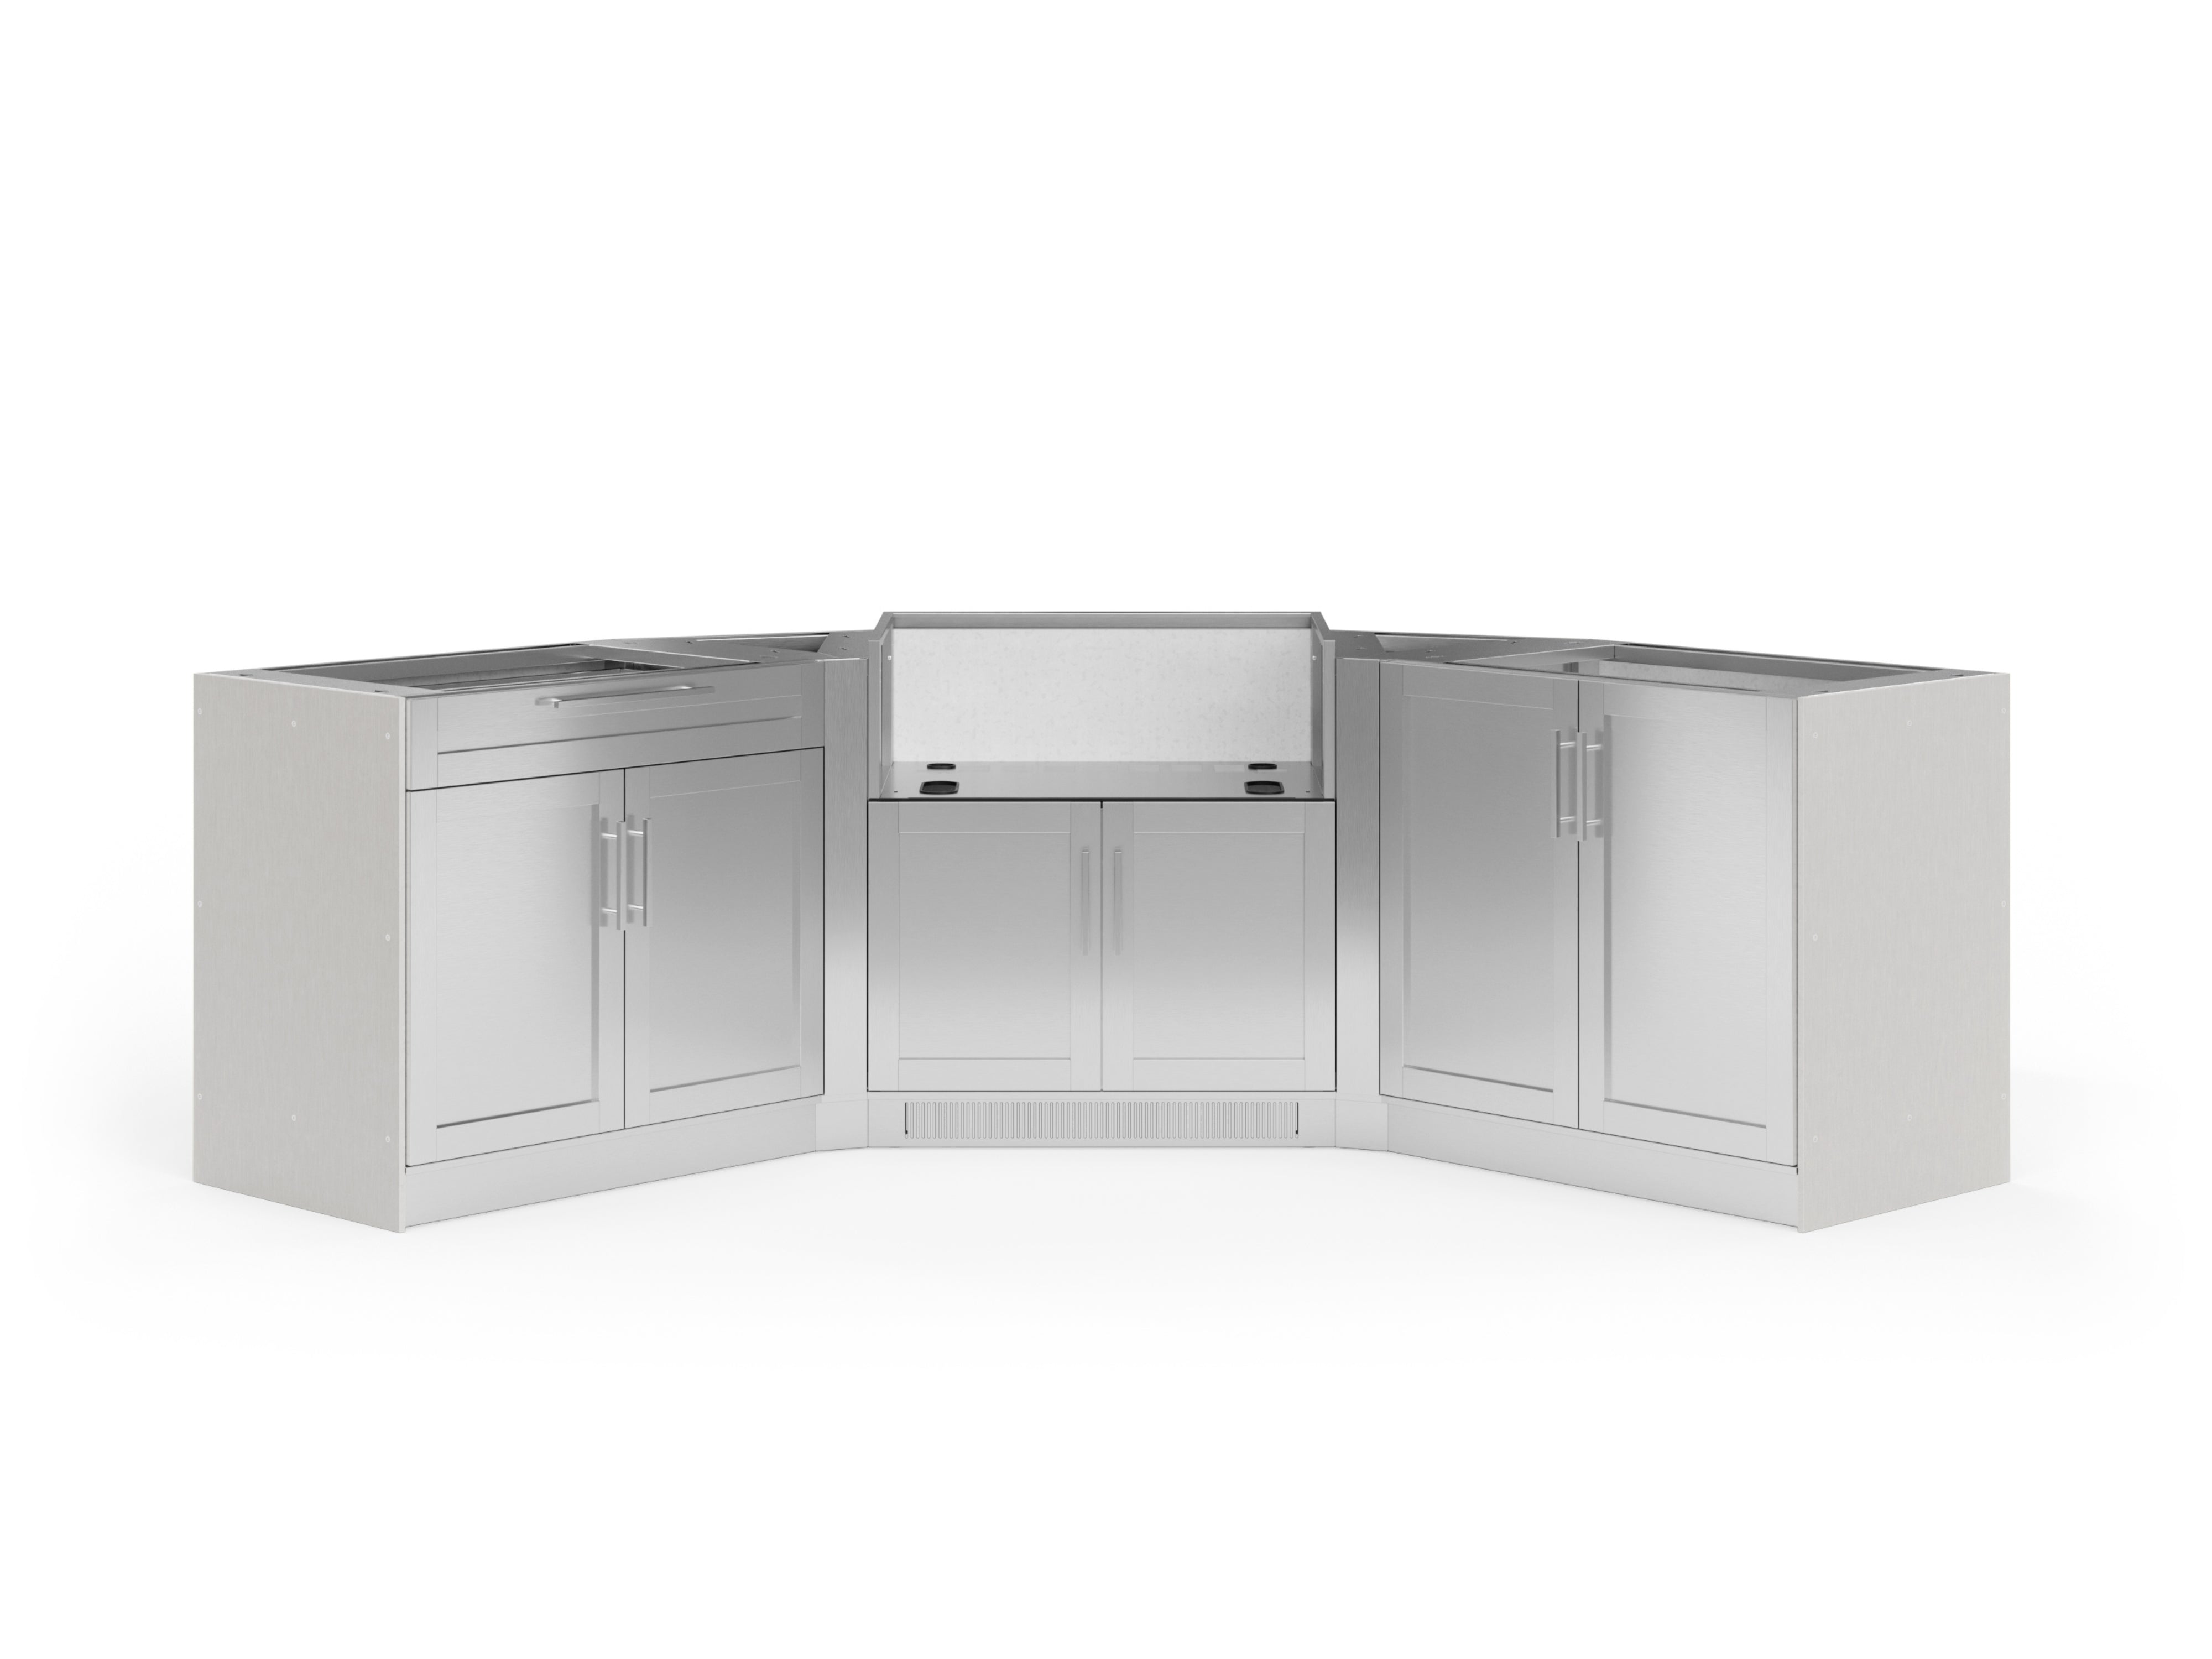 Outdoor Kitchen Signature Series 6 Piece U Shape Cabinet Set with 2 Door, Bar and Grill Cabinet